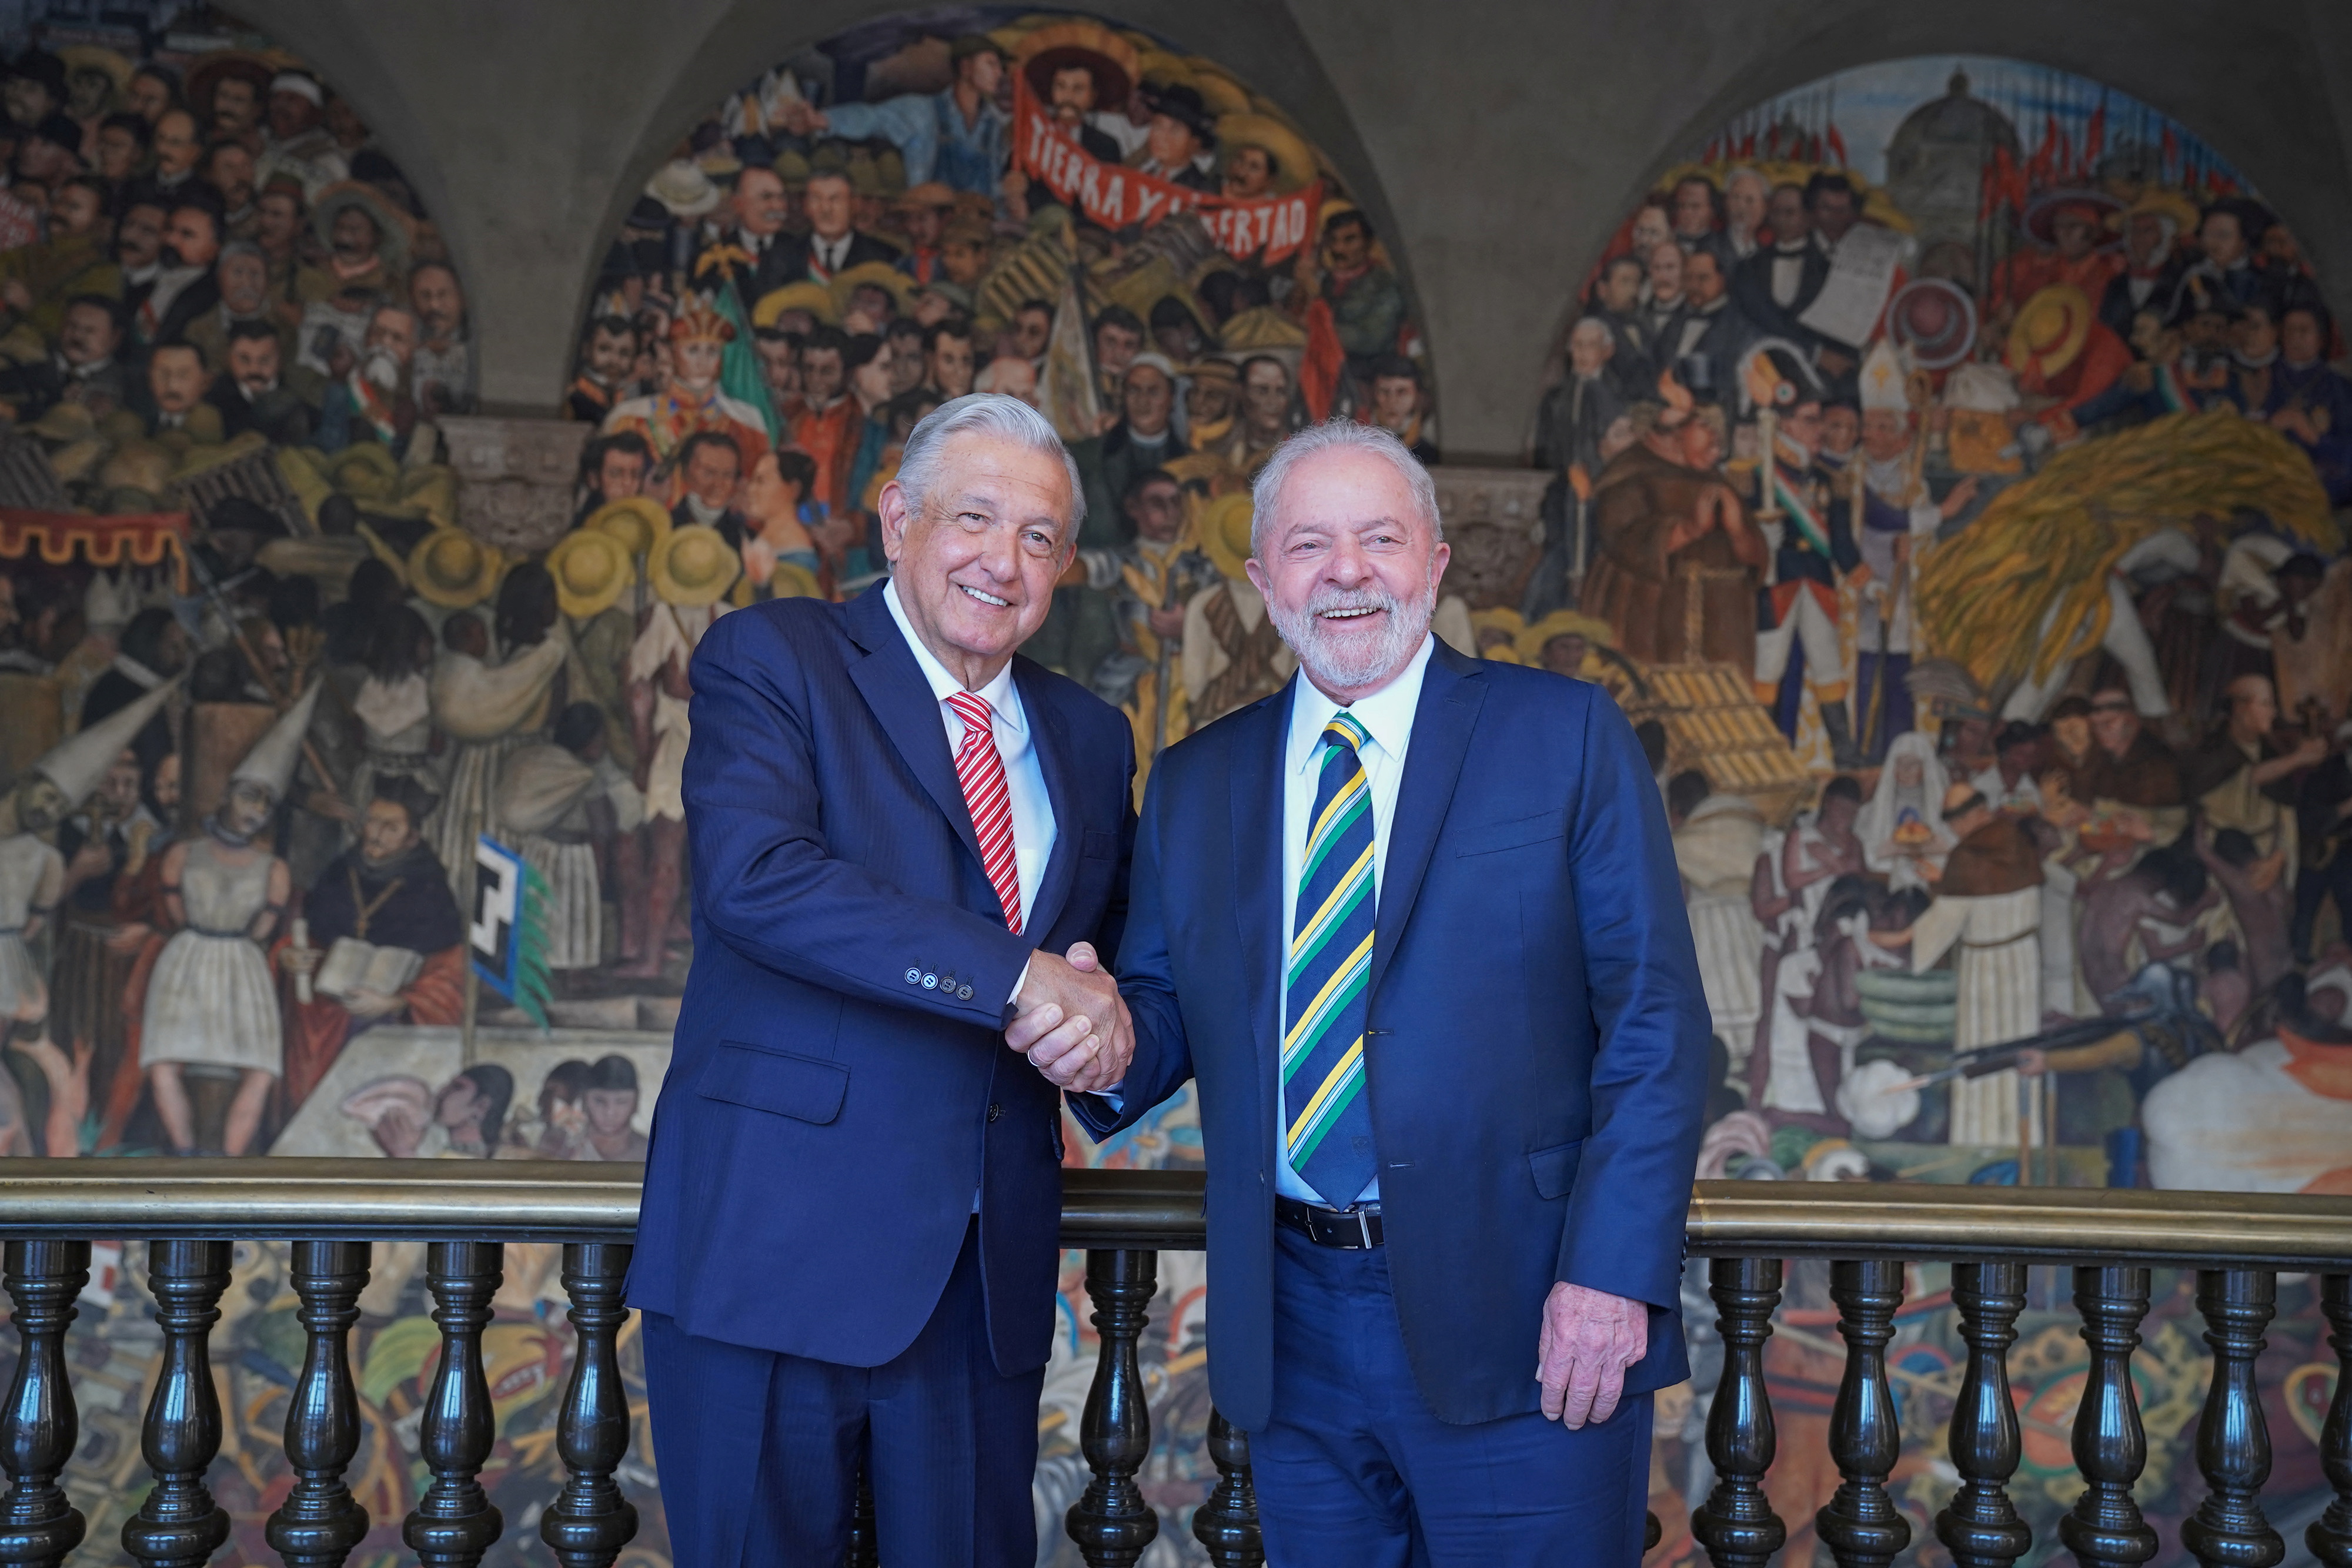 Mexican President Andres Manuel Lopez Obrador shakes hands with Brazil's former President Luiz Inacio Lula da Silva, at the National Palace Mexico City, Mexico March 2, 2022. Mexico Presidency/Handout via REUTERS ATTENTION EDITORS - THIS IMAGE WAS PROVIDED BY A THIRD PARTY. NO RESALES. NO ARCHIVES